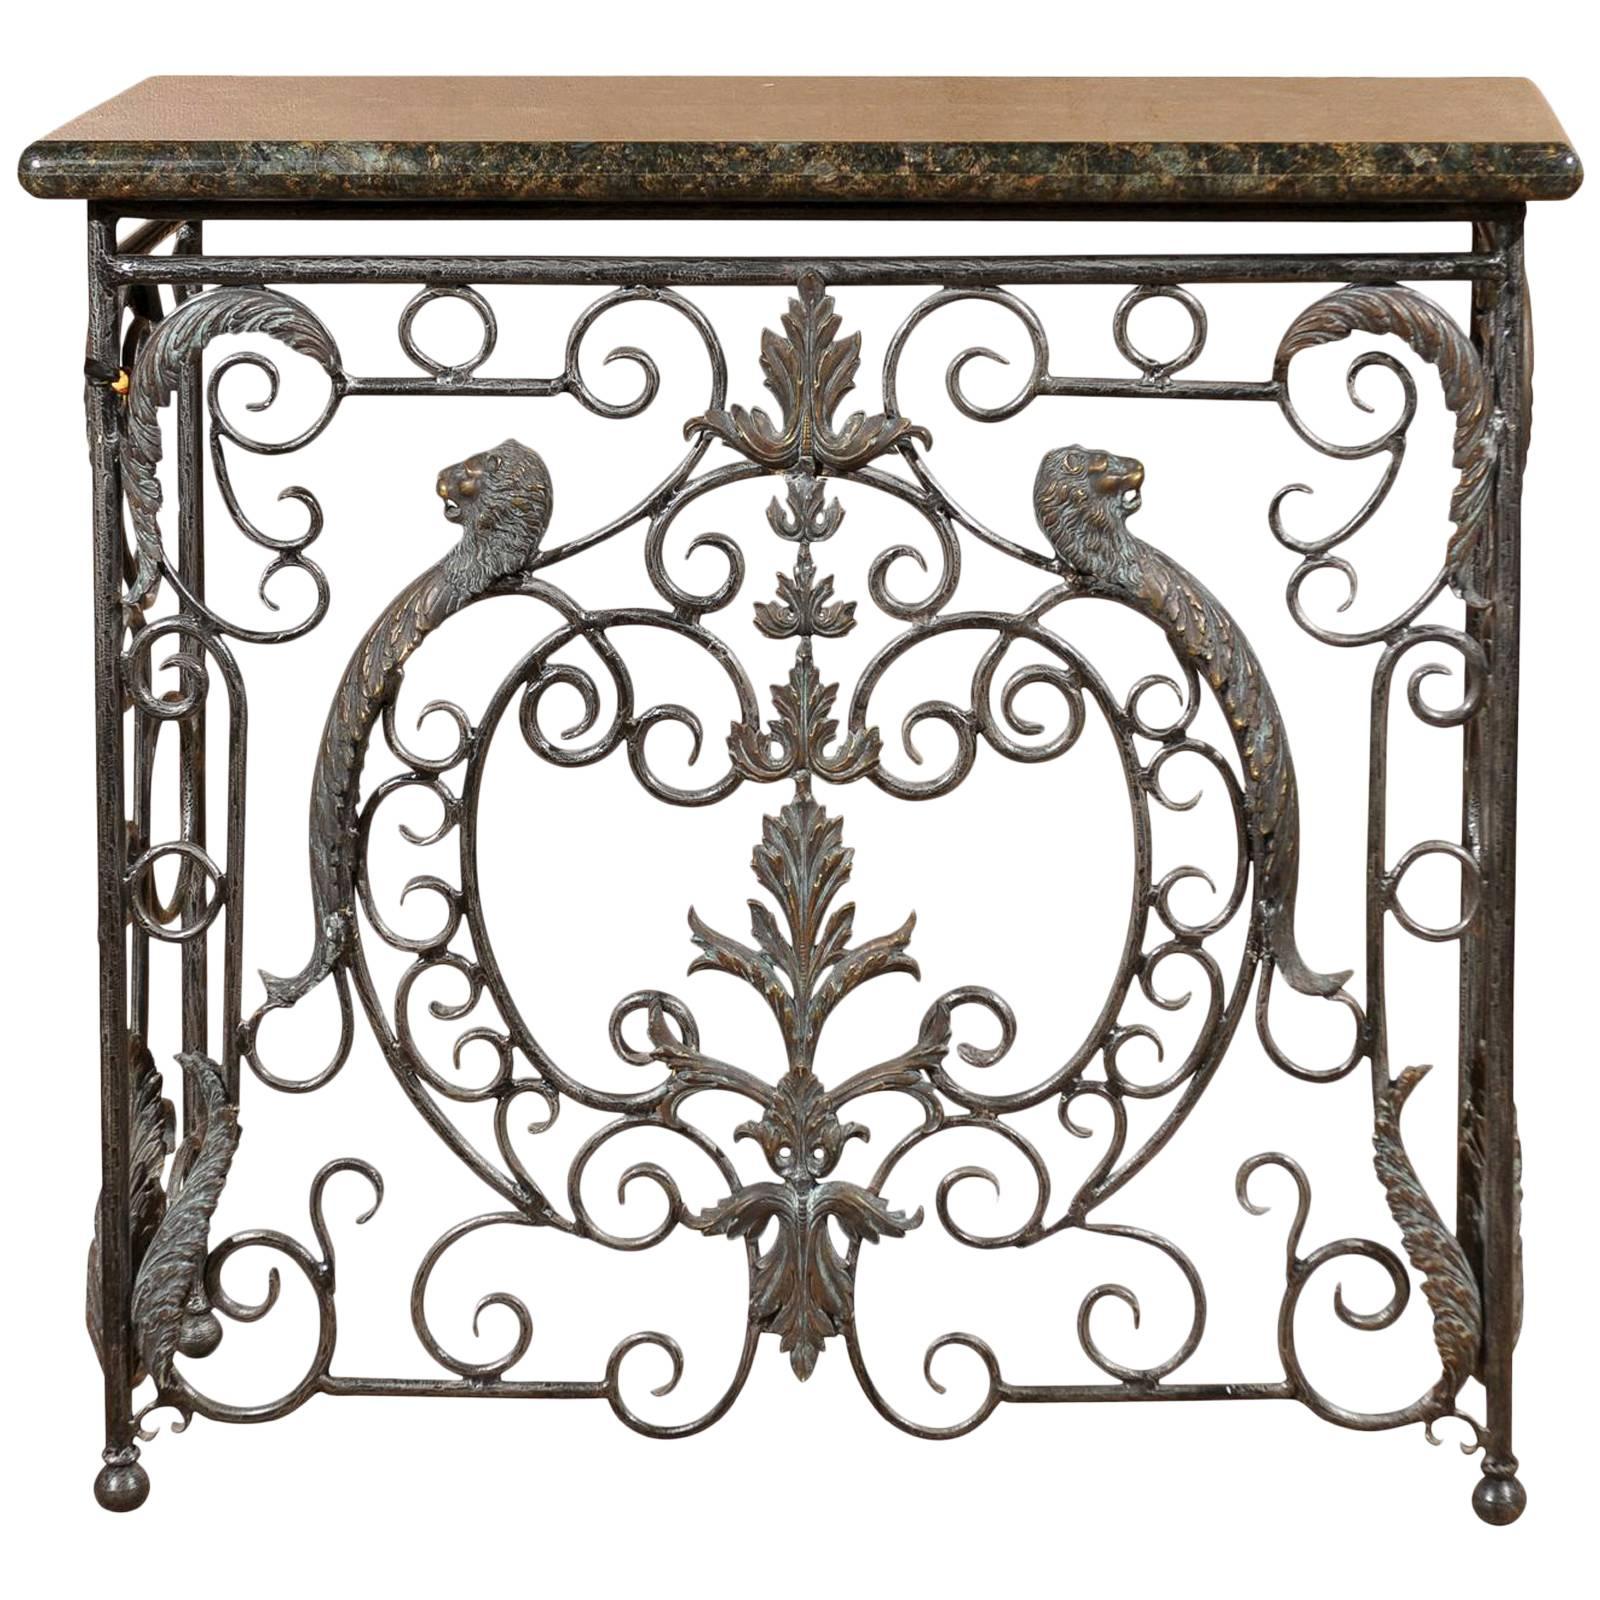 Midcentury Iron Console with Granite Top